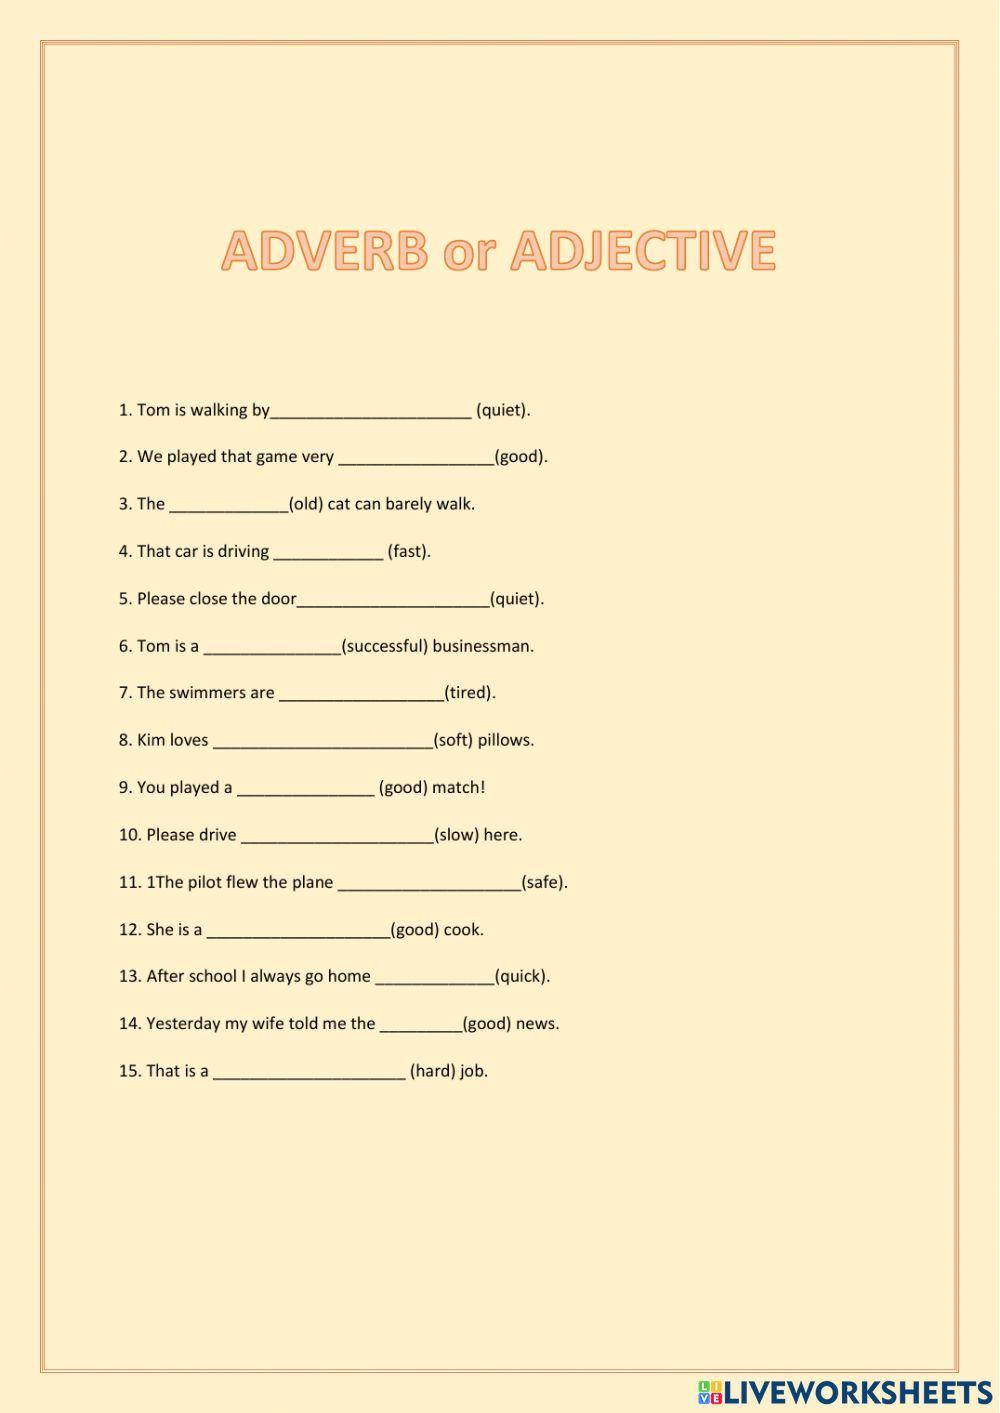 Adverbs and adjectives